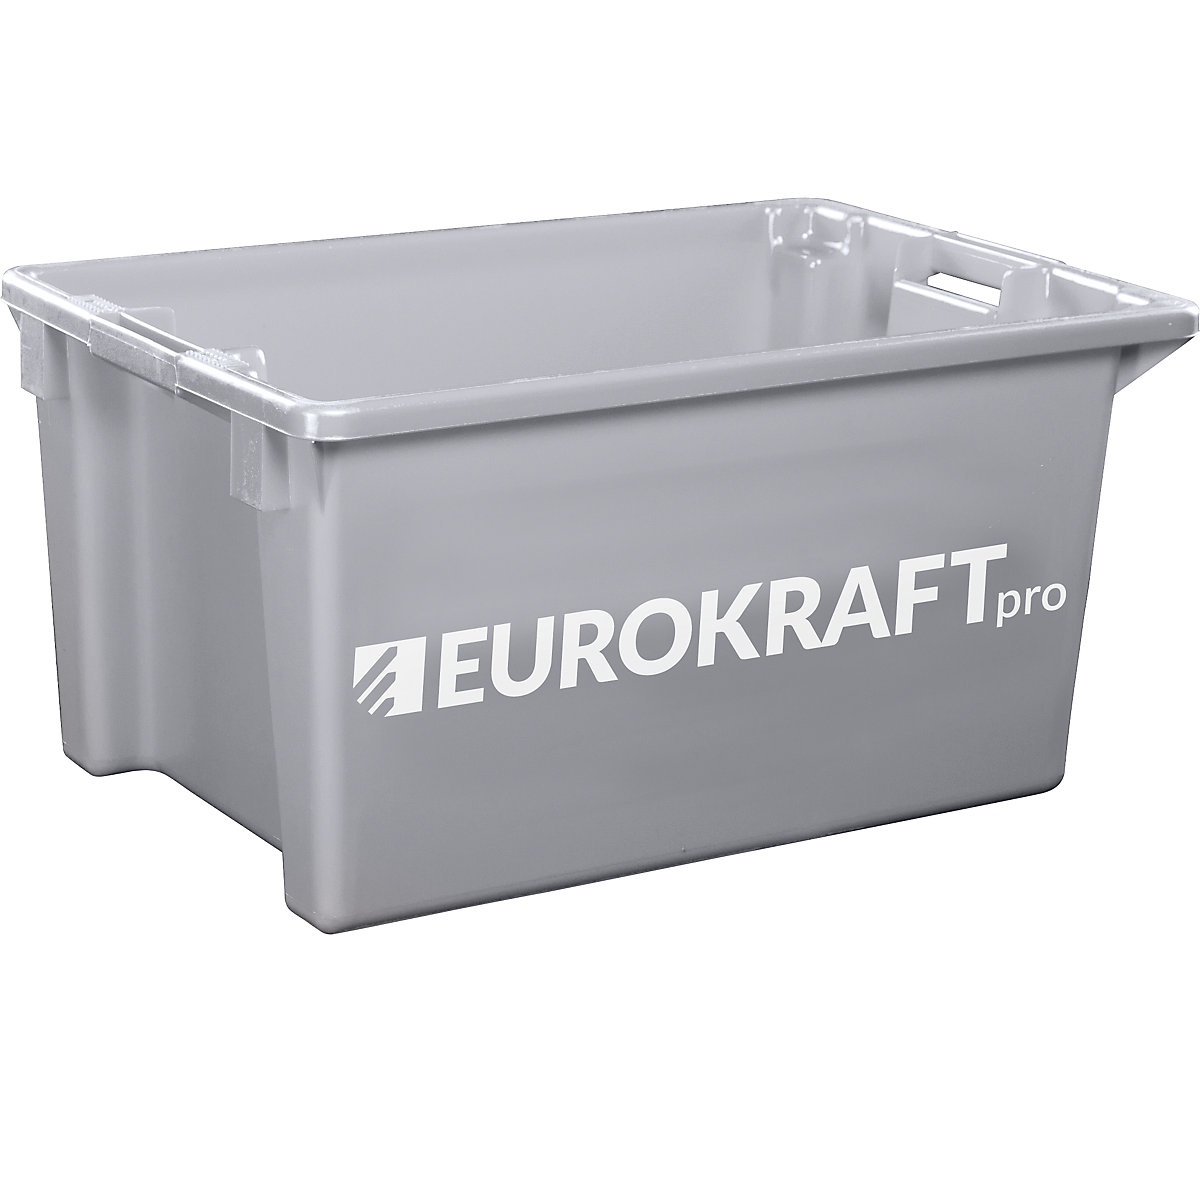 EUROKRAFTpro – Stack/nest container made of polypropylene suitable for foodstuffs, 70 l capacity, pack of 2, solid walls and base, grey